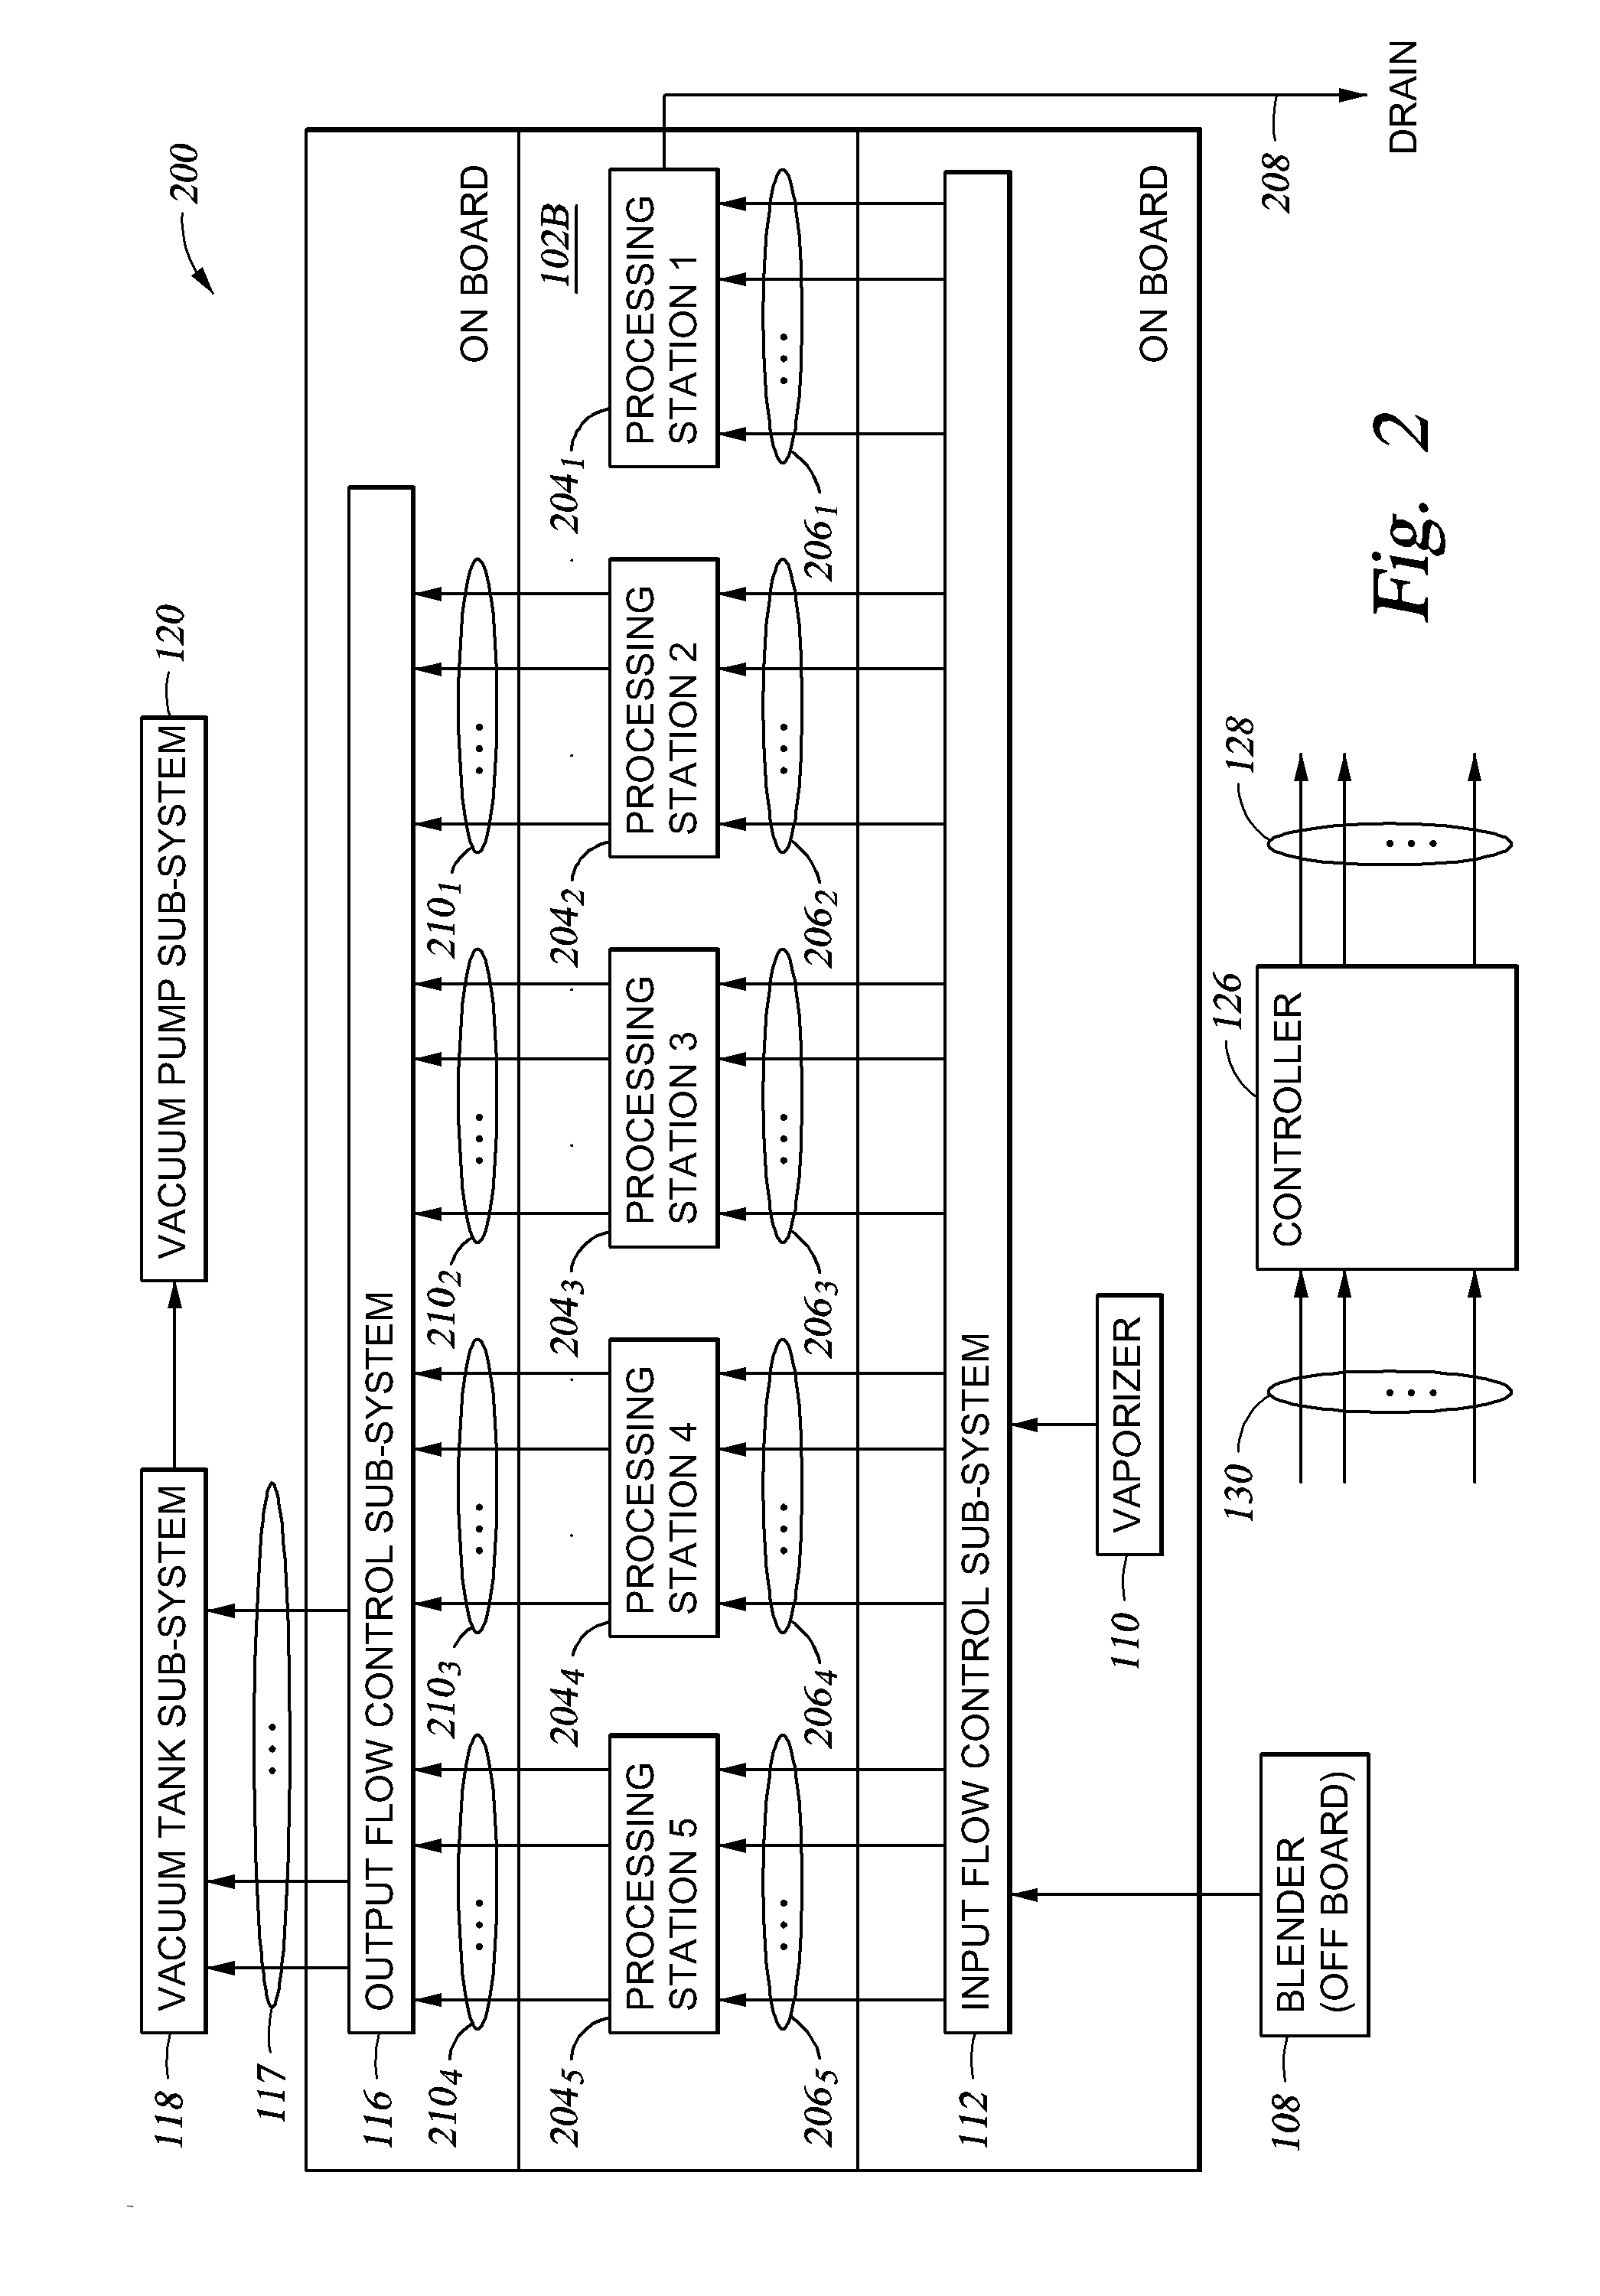 Systems and methods for reclaiming process fluids in a processing environment